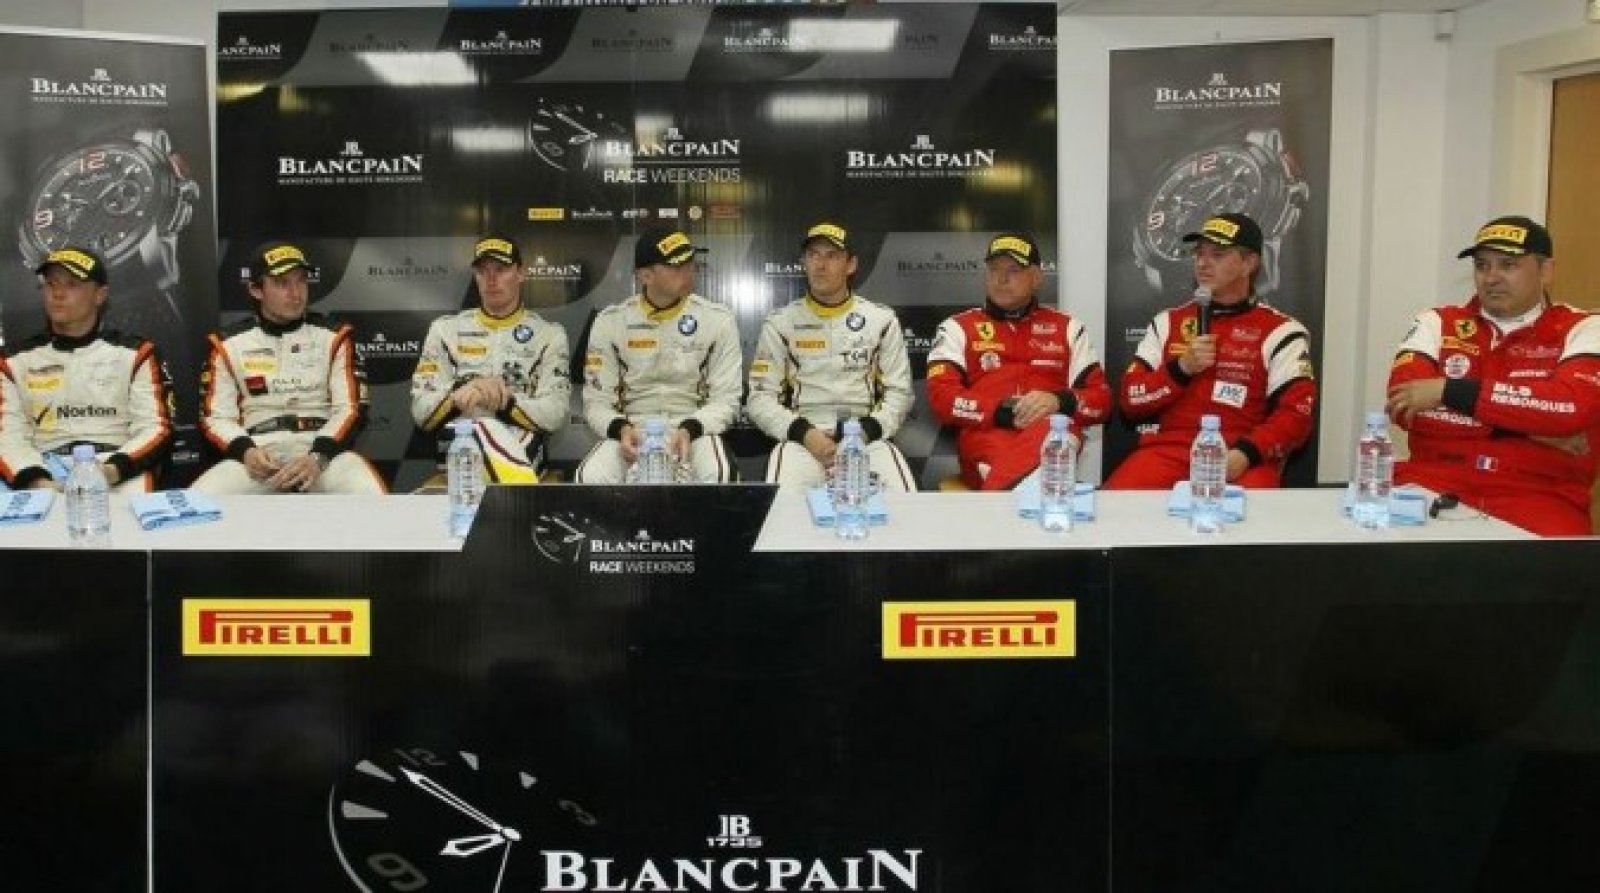 What the drivers said at Paul Ricard